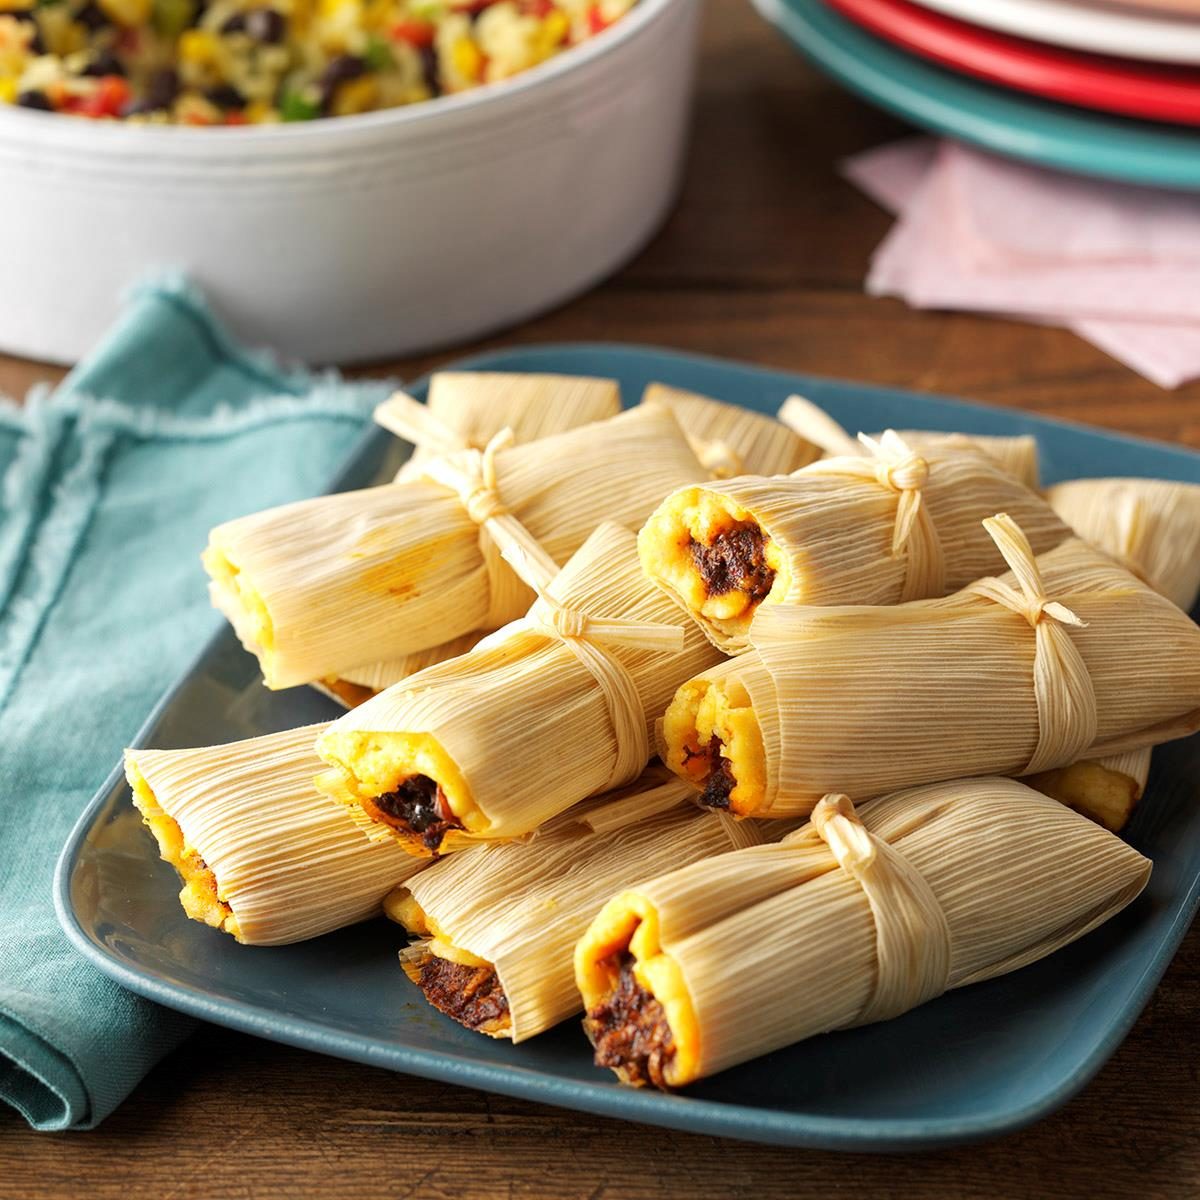 Chicken Tamales Recipe: How to Make It